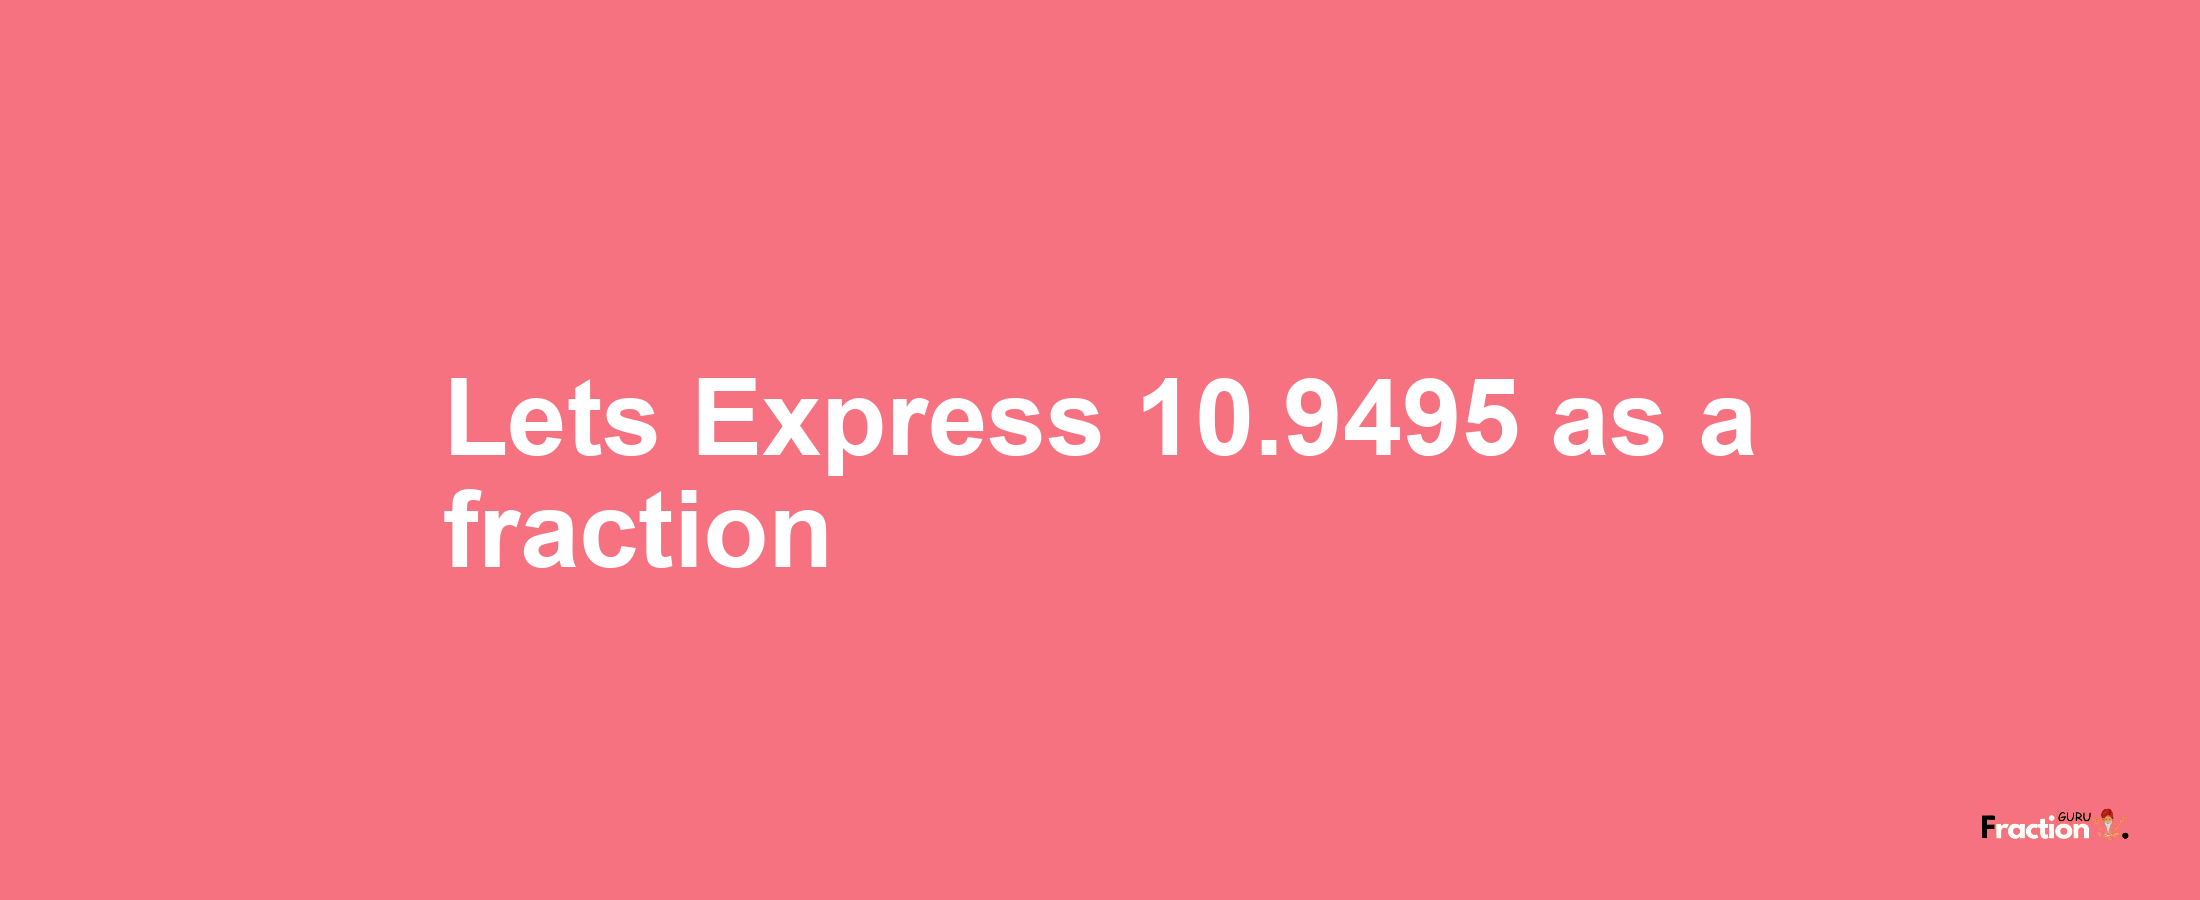 Lets Express 10.9495 as afraction